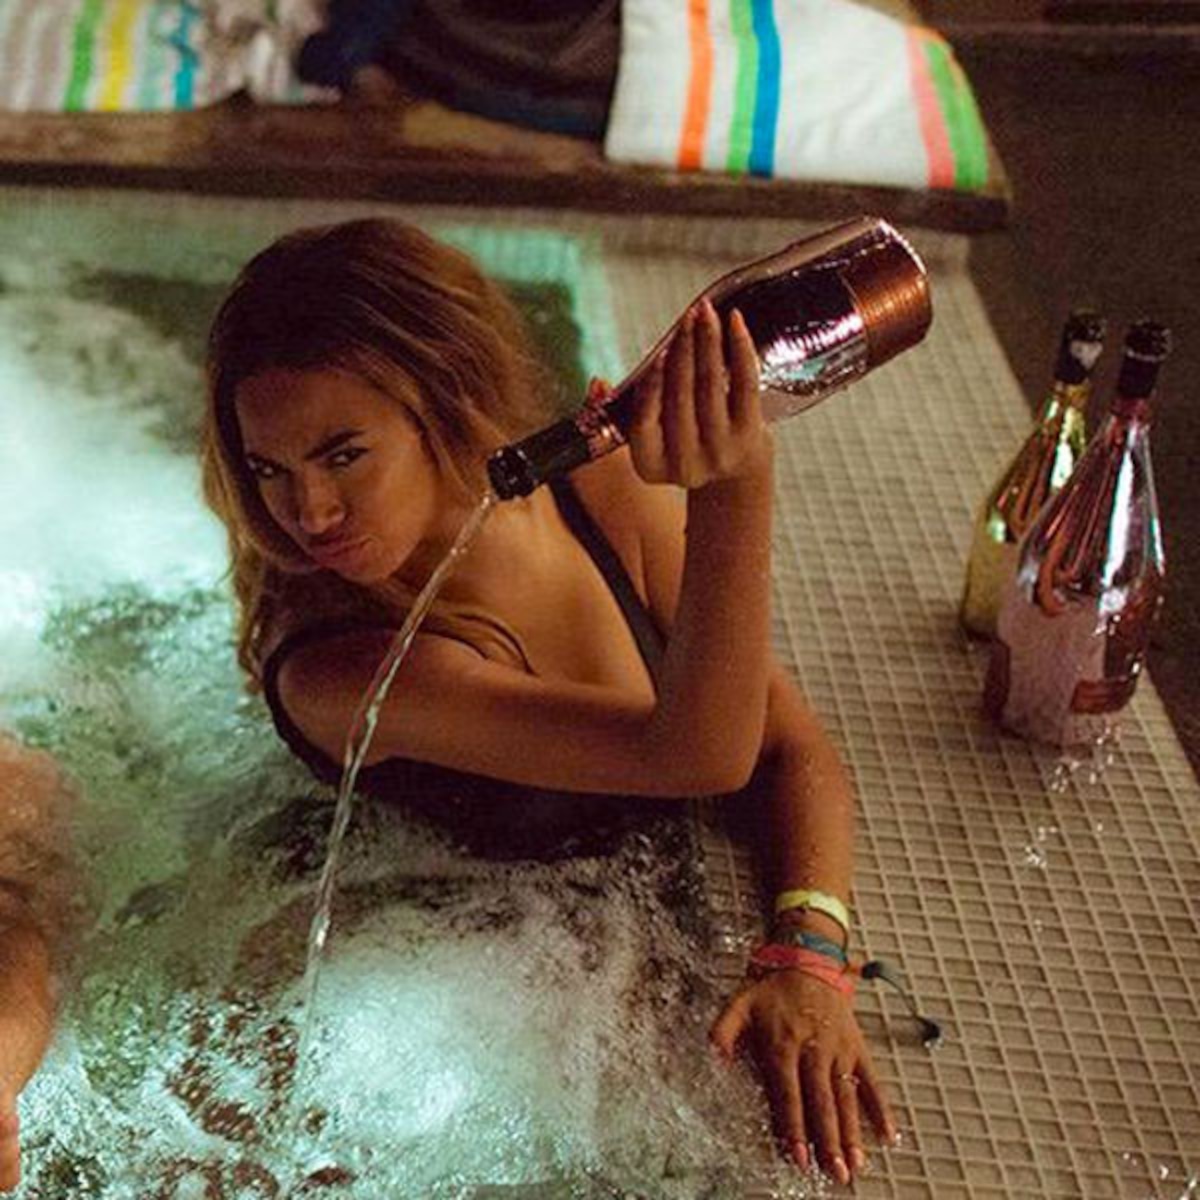 Did Bey Really Pour a $20K Bottle of Wine Into a Hot Tub?